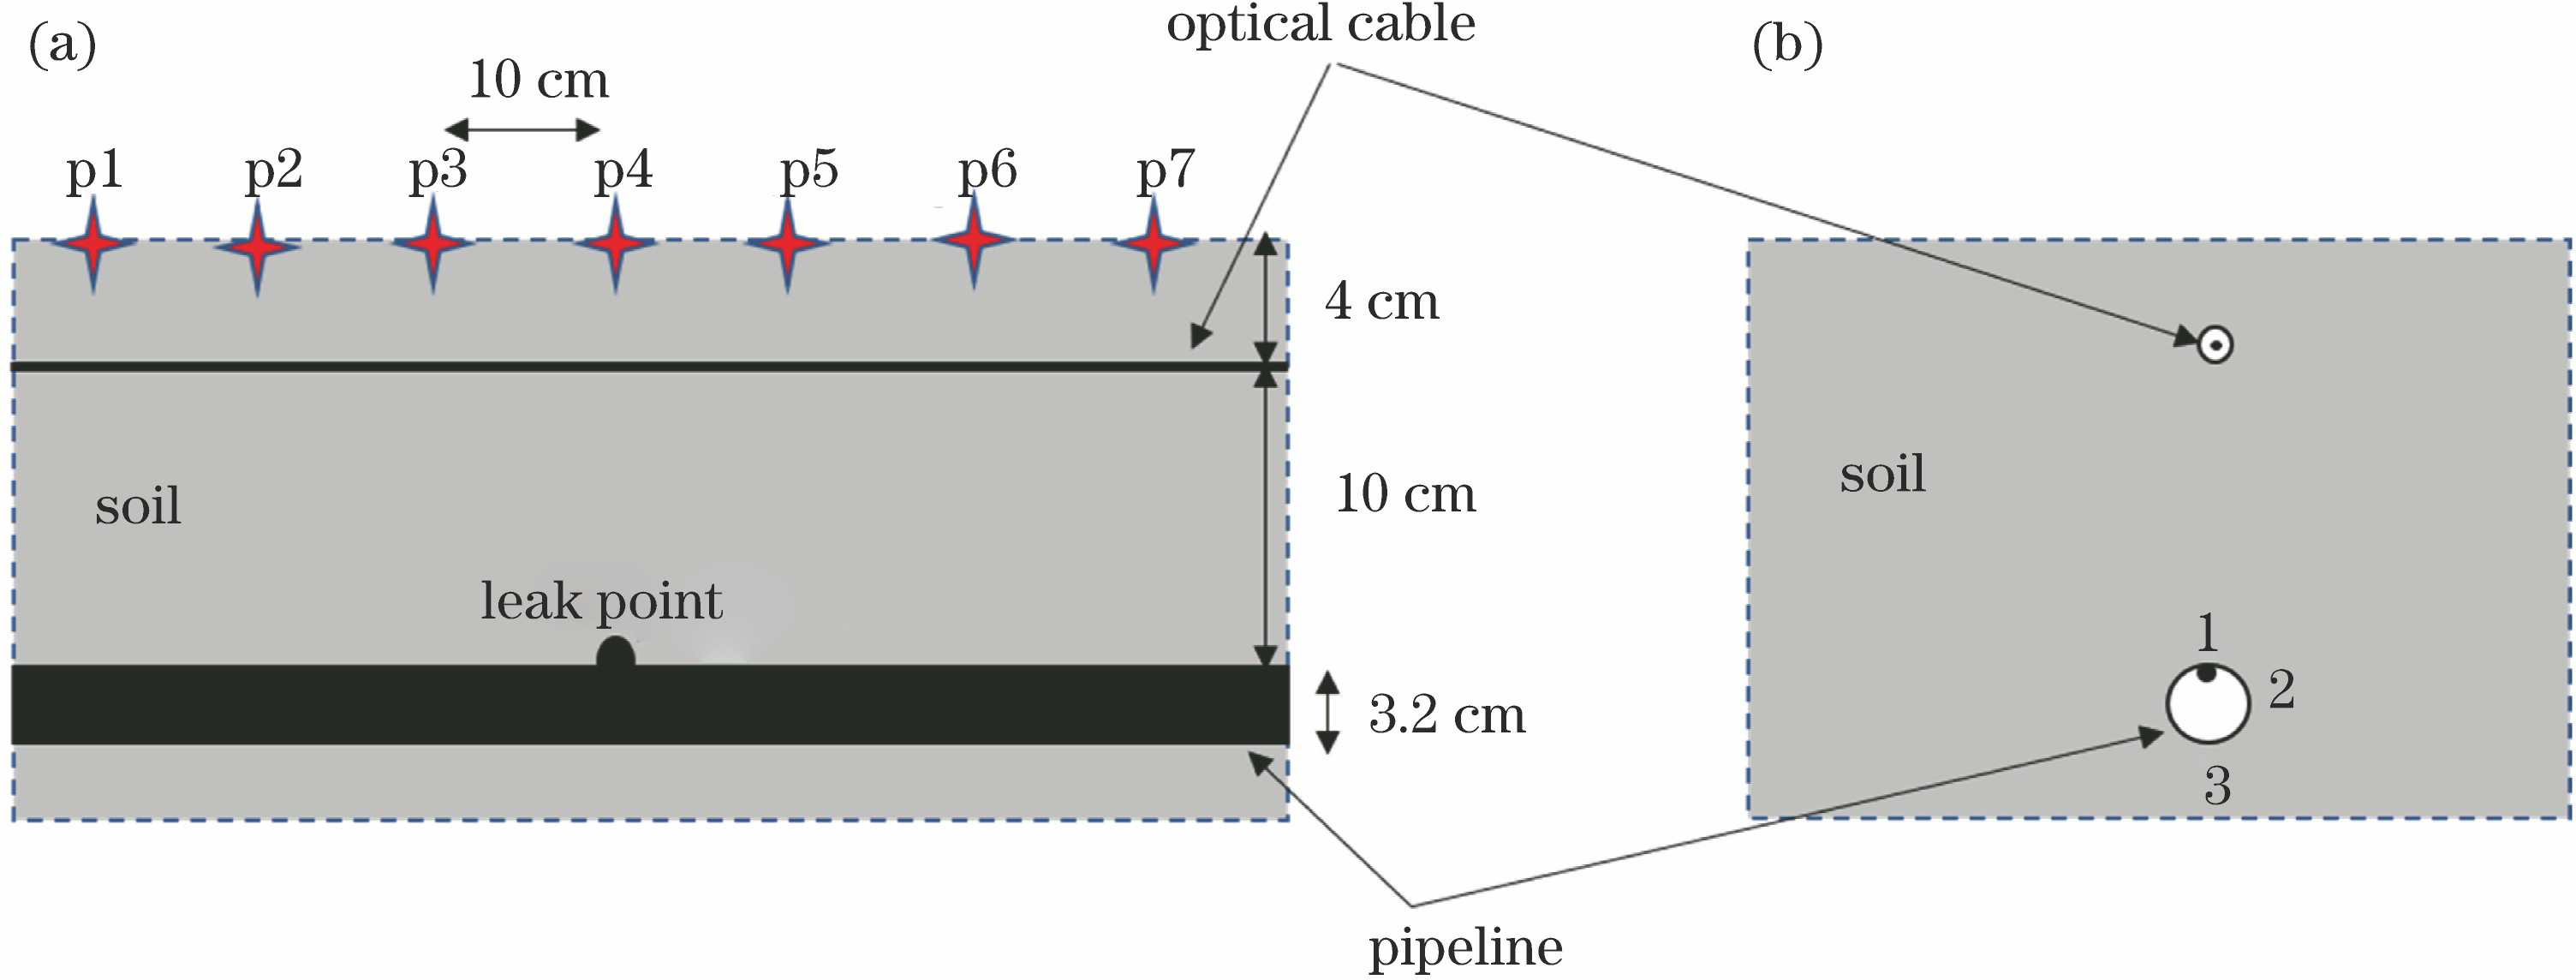 Front and side views of pipeline and optical cable. (a) Front view; (b) side view